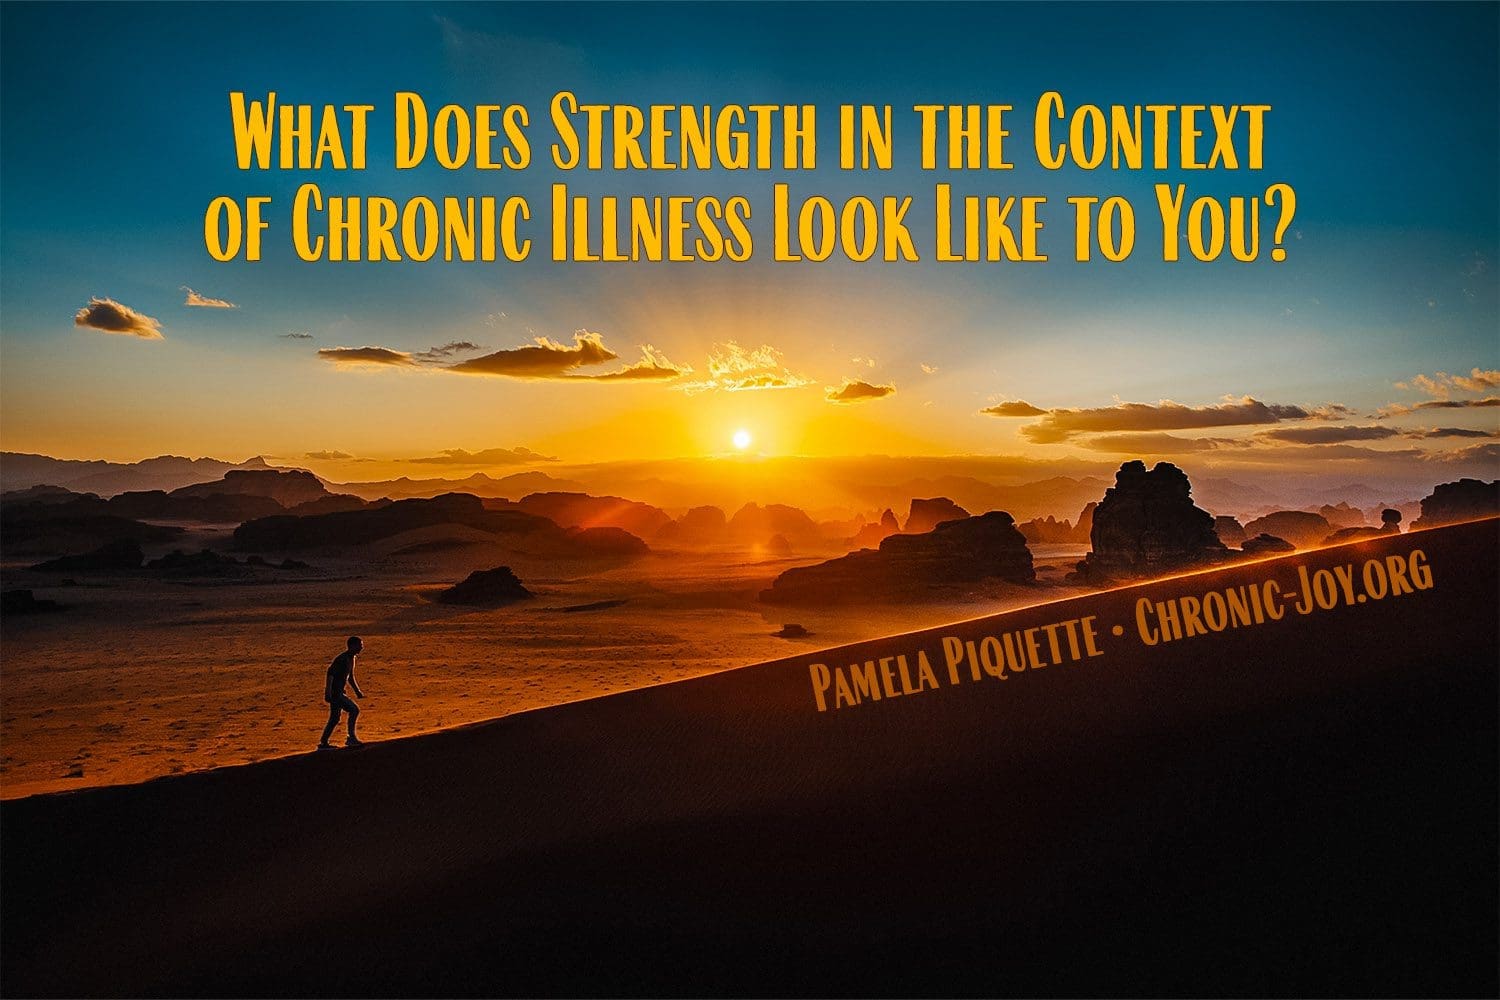 "What does strength in the context of chronic illness look like to you?" Pamela Piquette